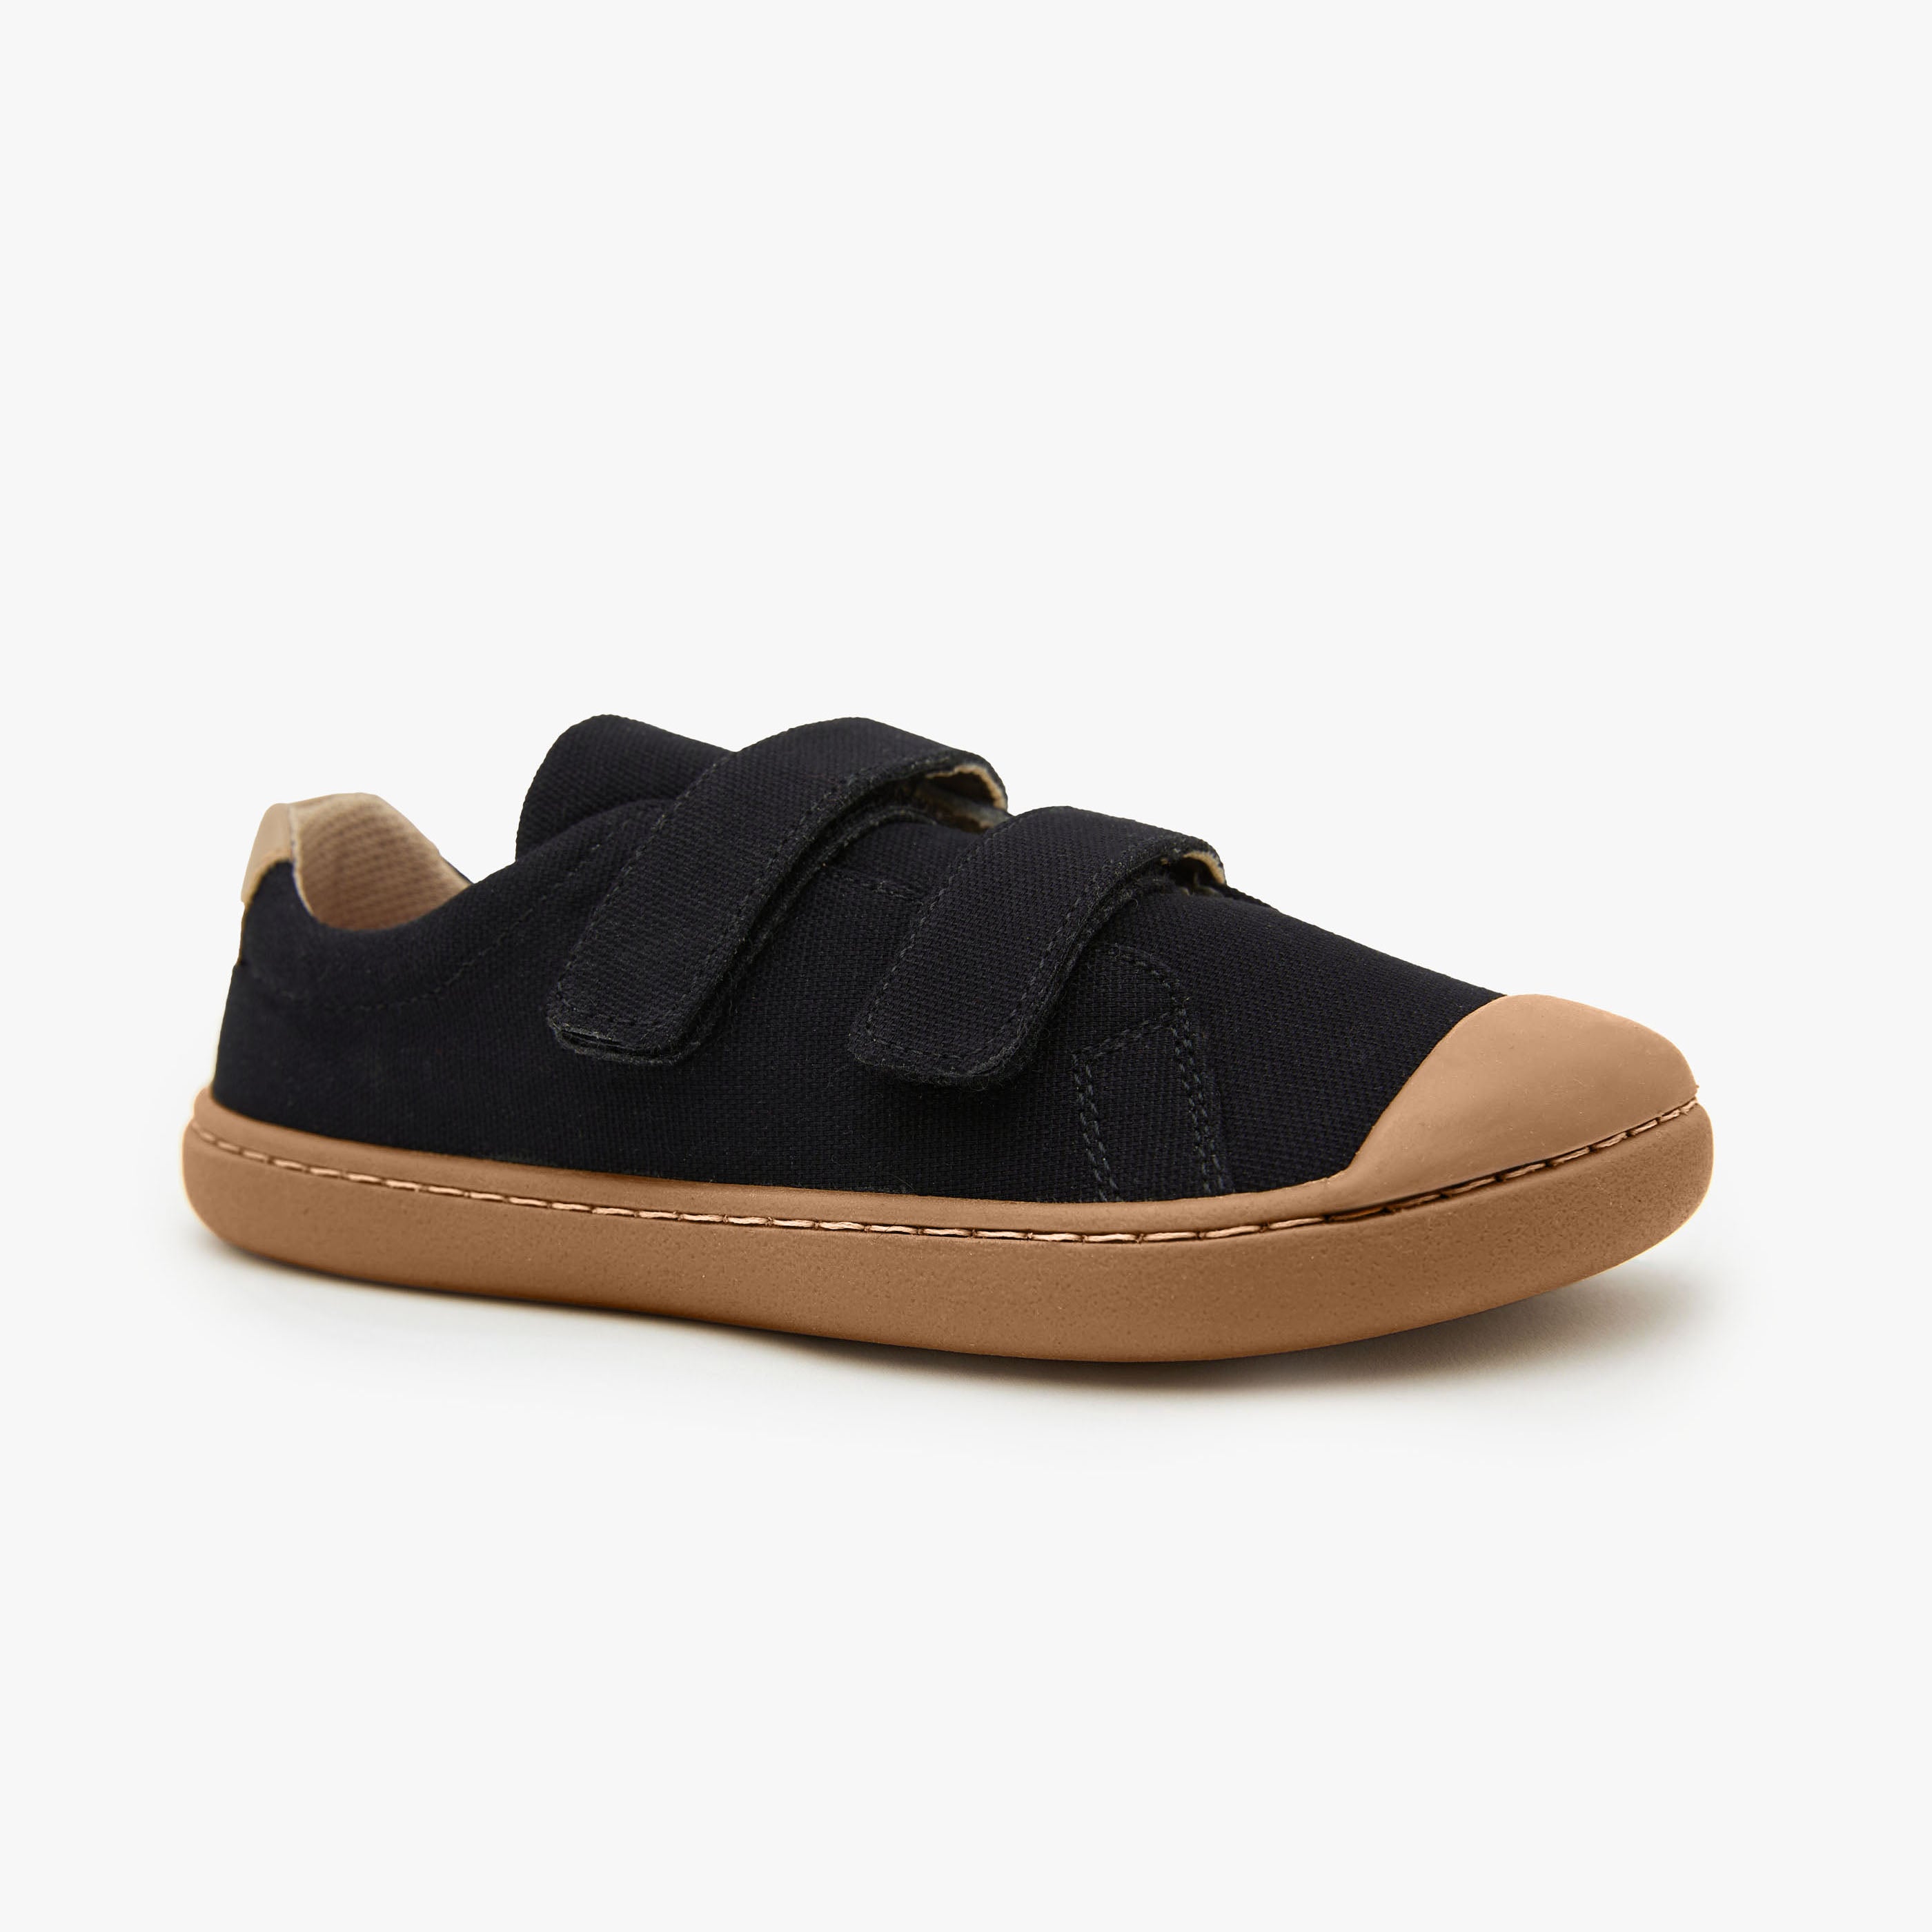 Barefoot shoes for kids - Black/Amber Sole - The Easy Hook & Loop in ...